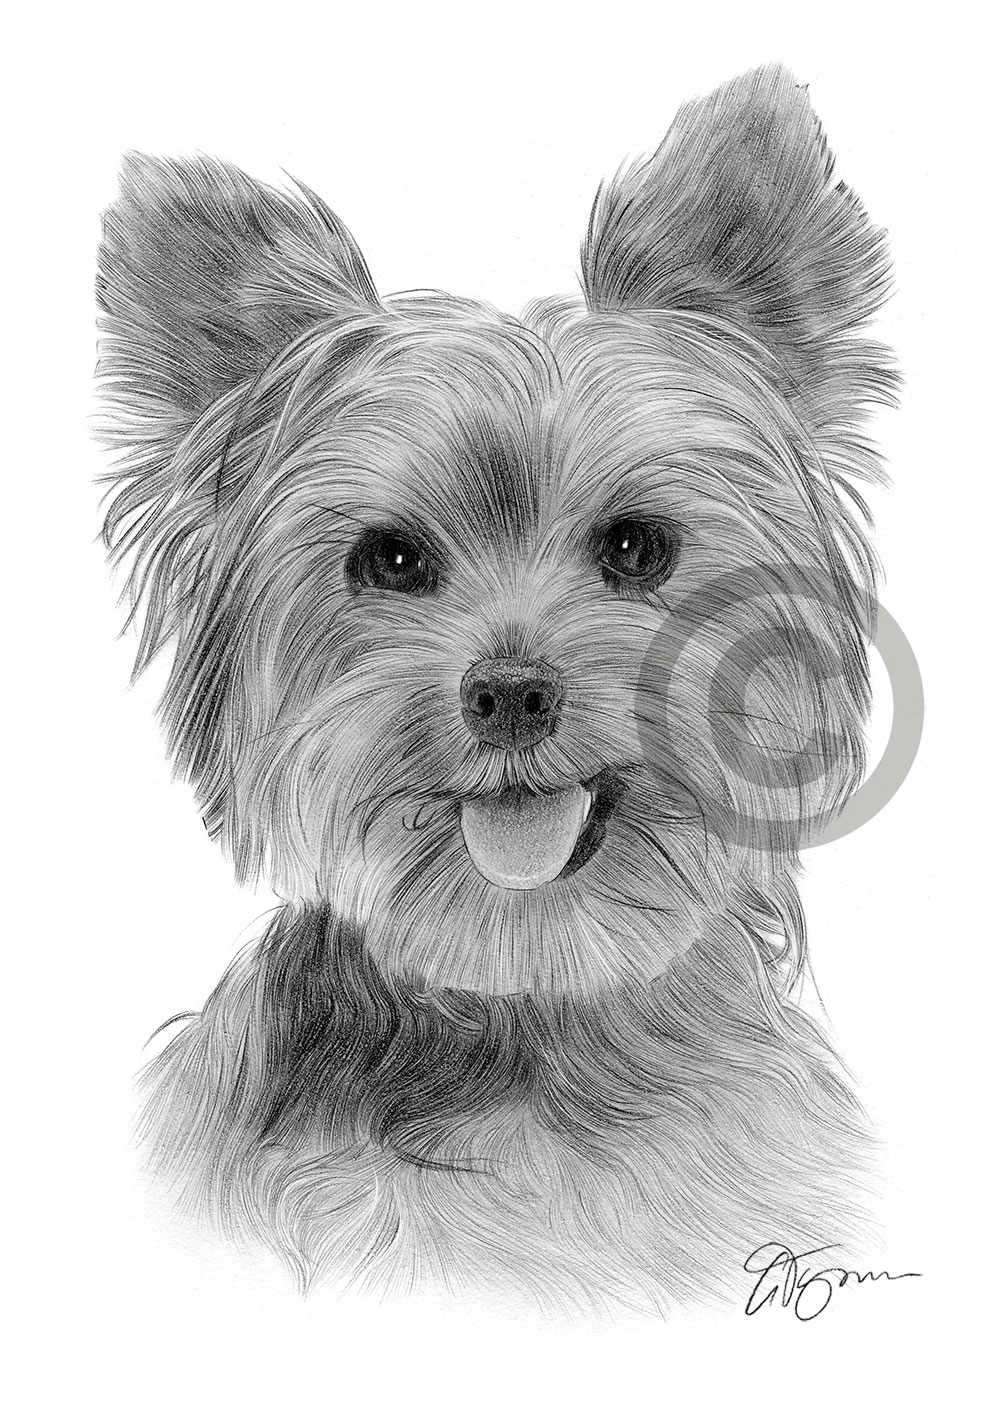 YORKSHIRE TERRIER art pencil drawing print A3 / A4 sizes signed by